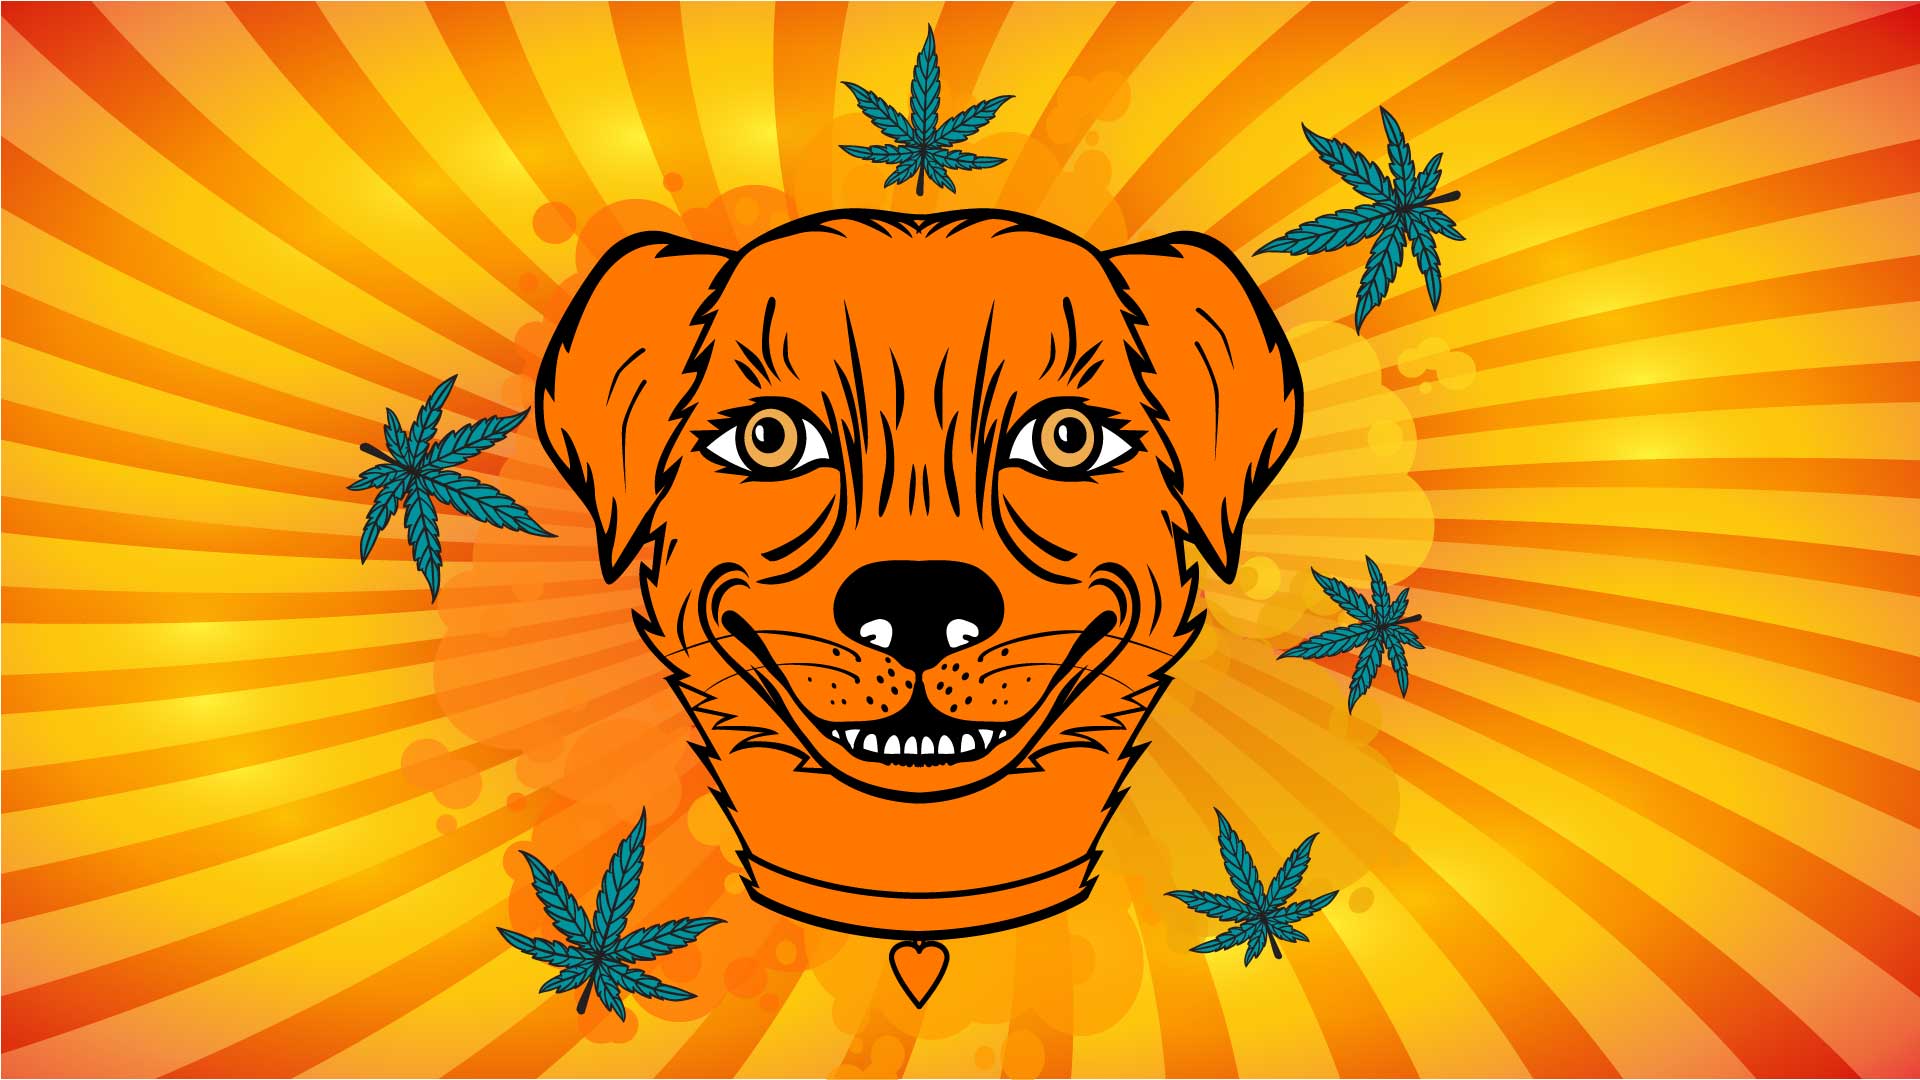 Can my pet get high from second hand smoke?